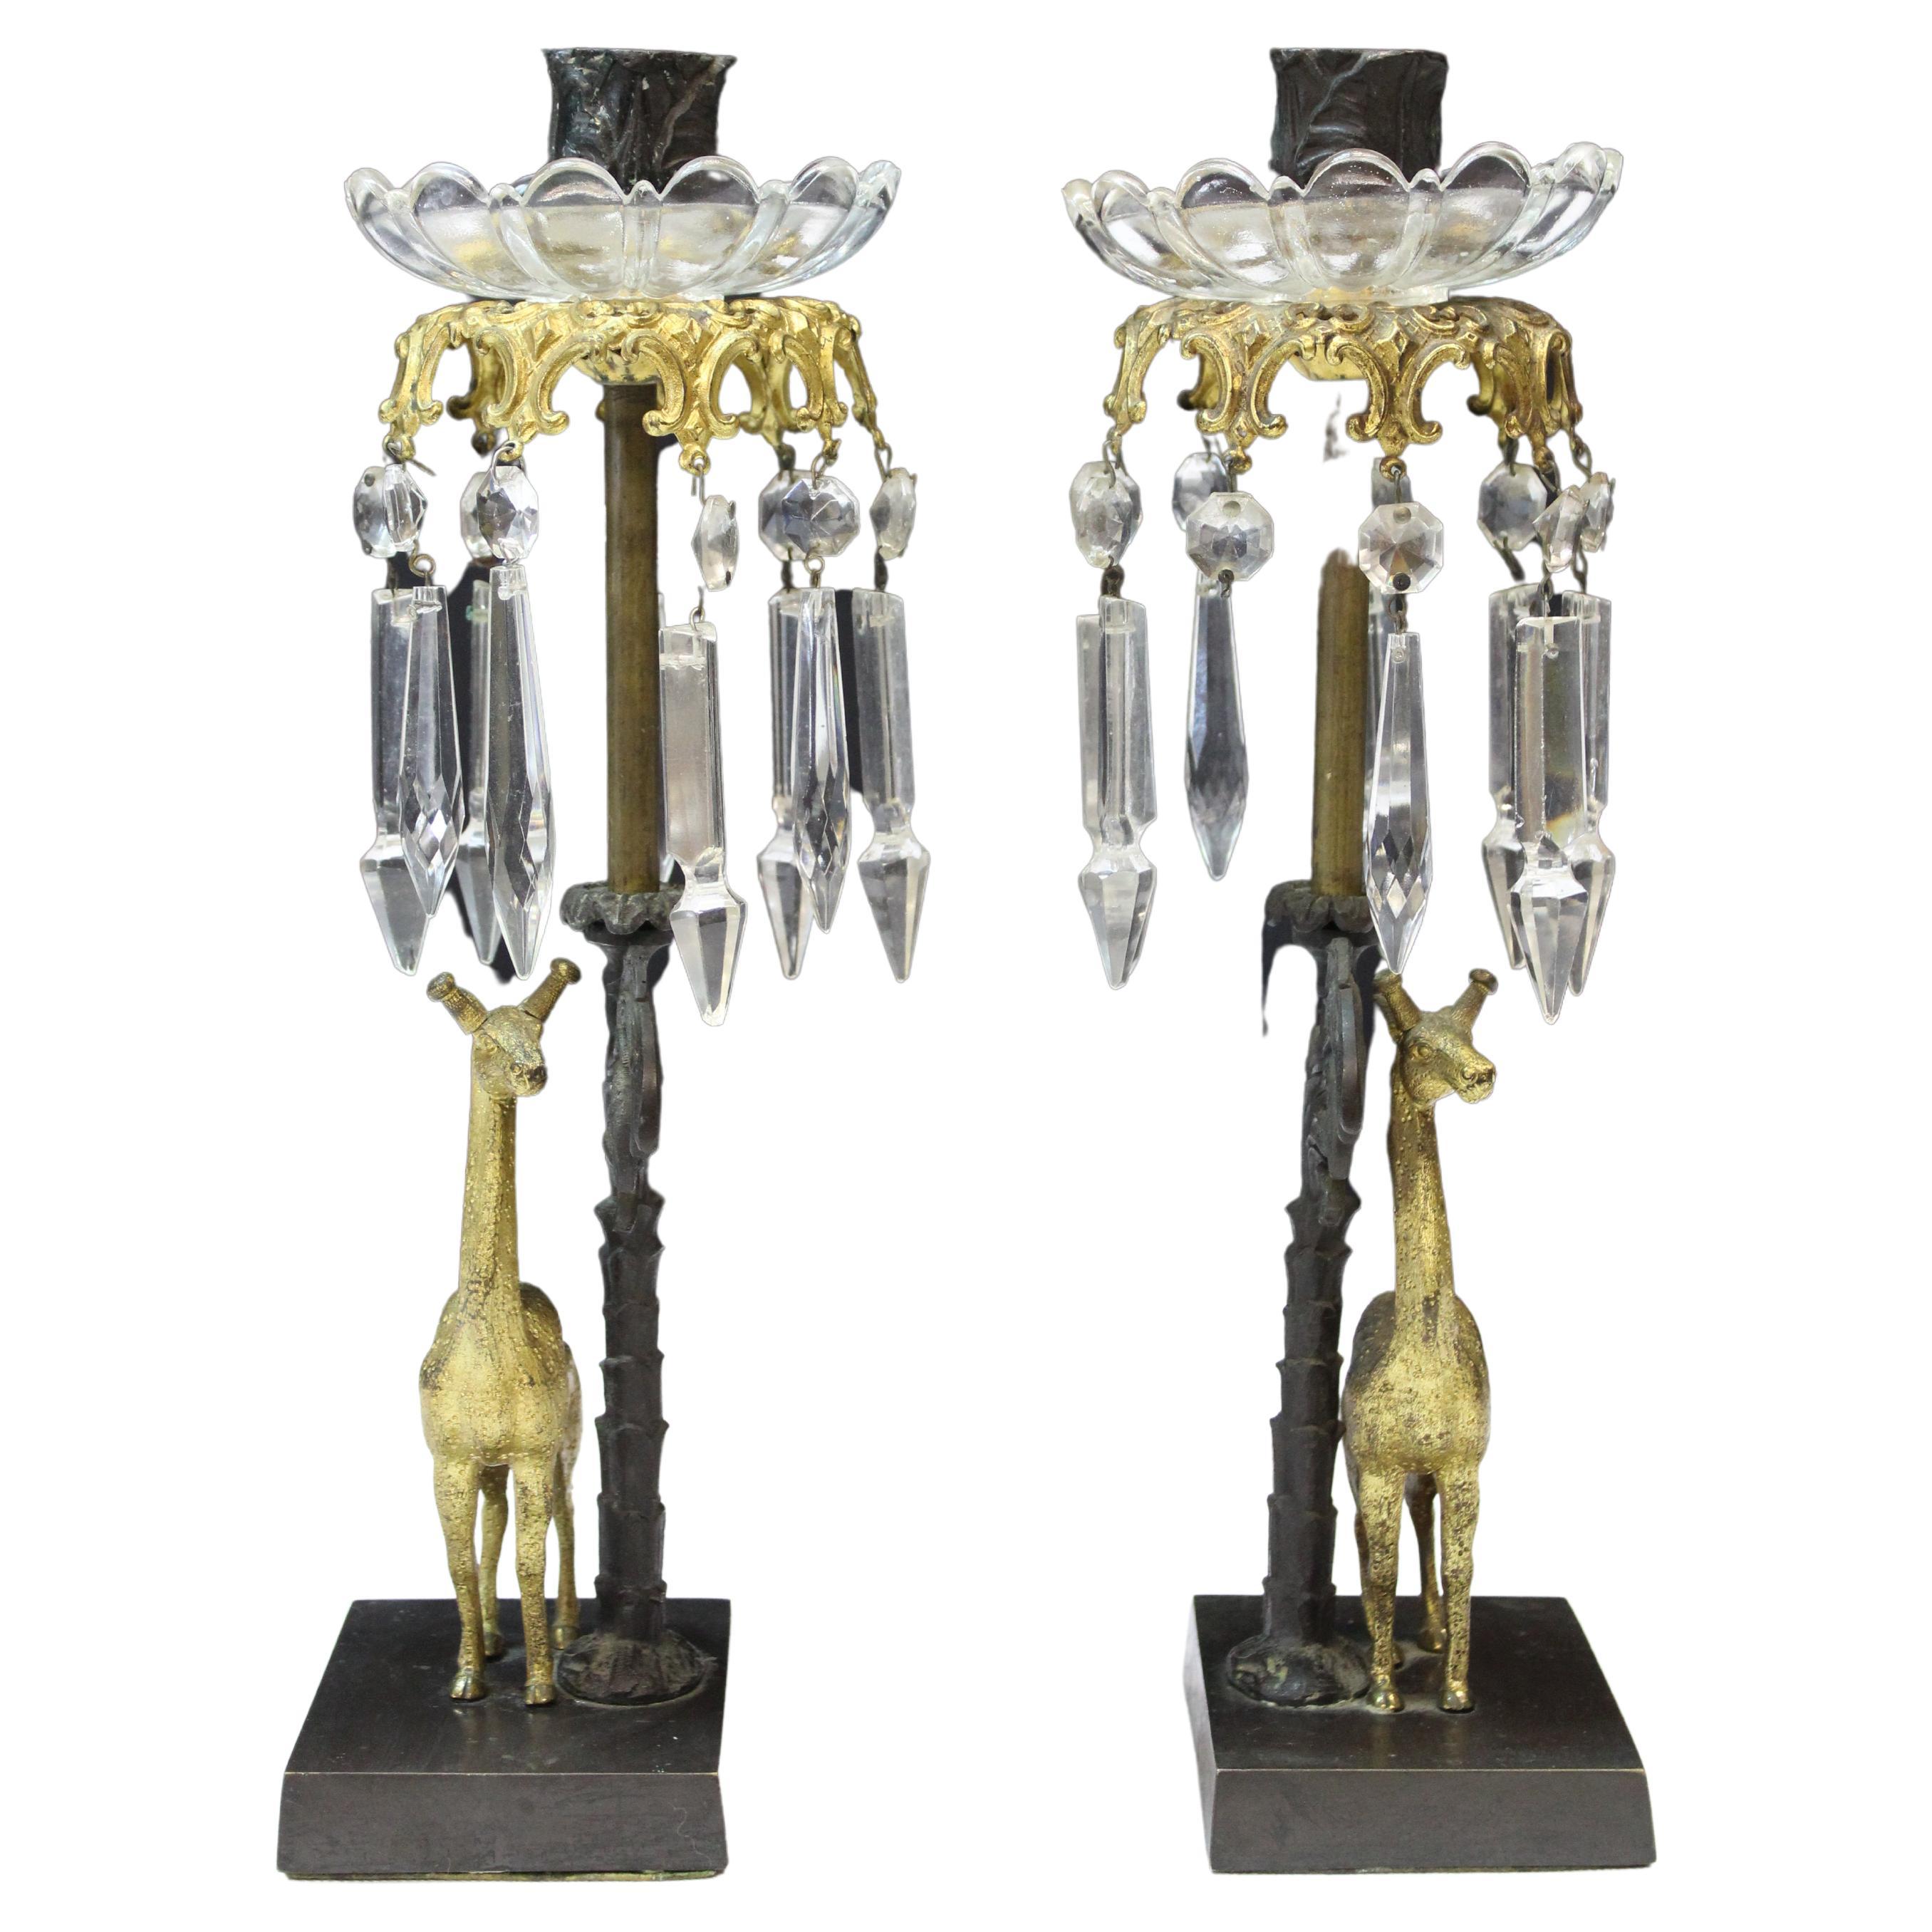 Pr Victorian Glass & Crystal Metal Candlestick Holders with Gilded Giraffes For Sale